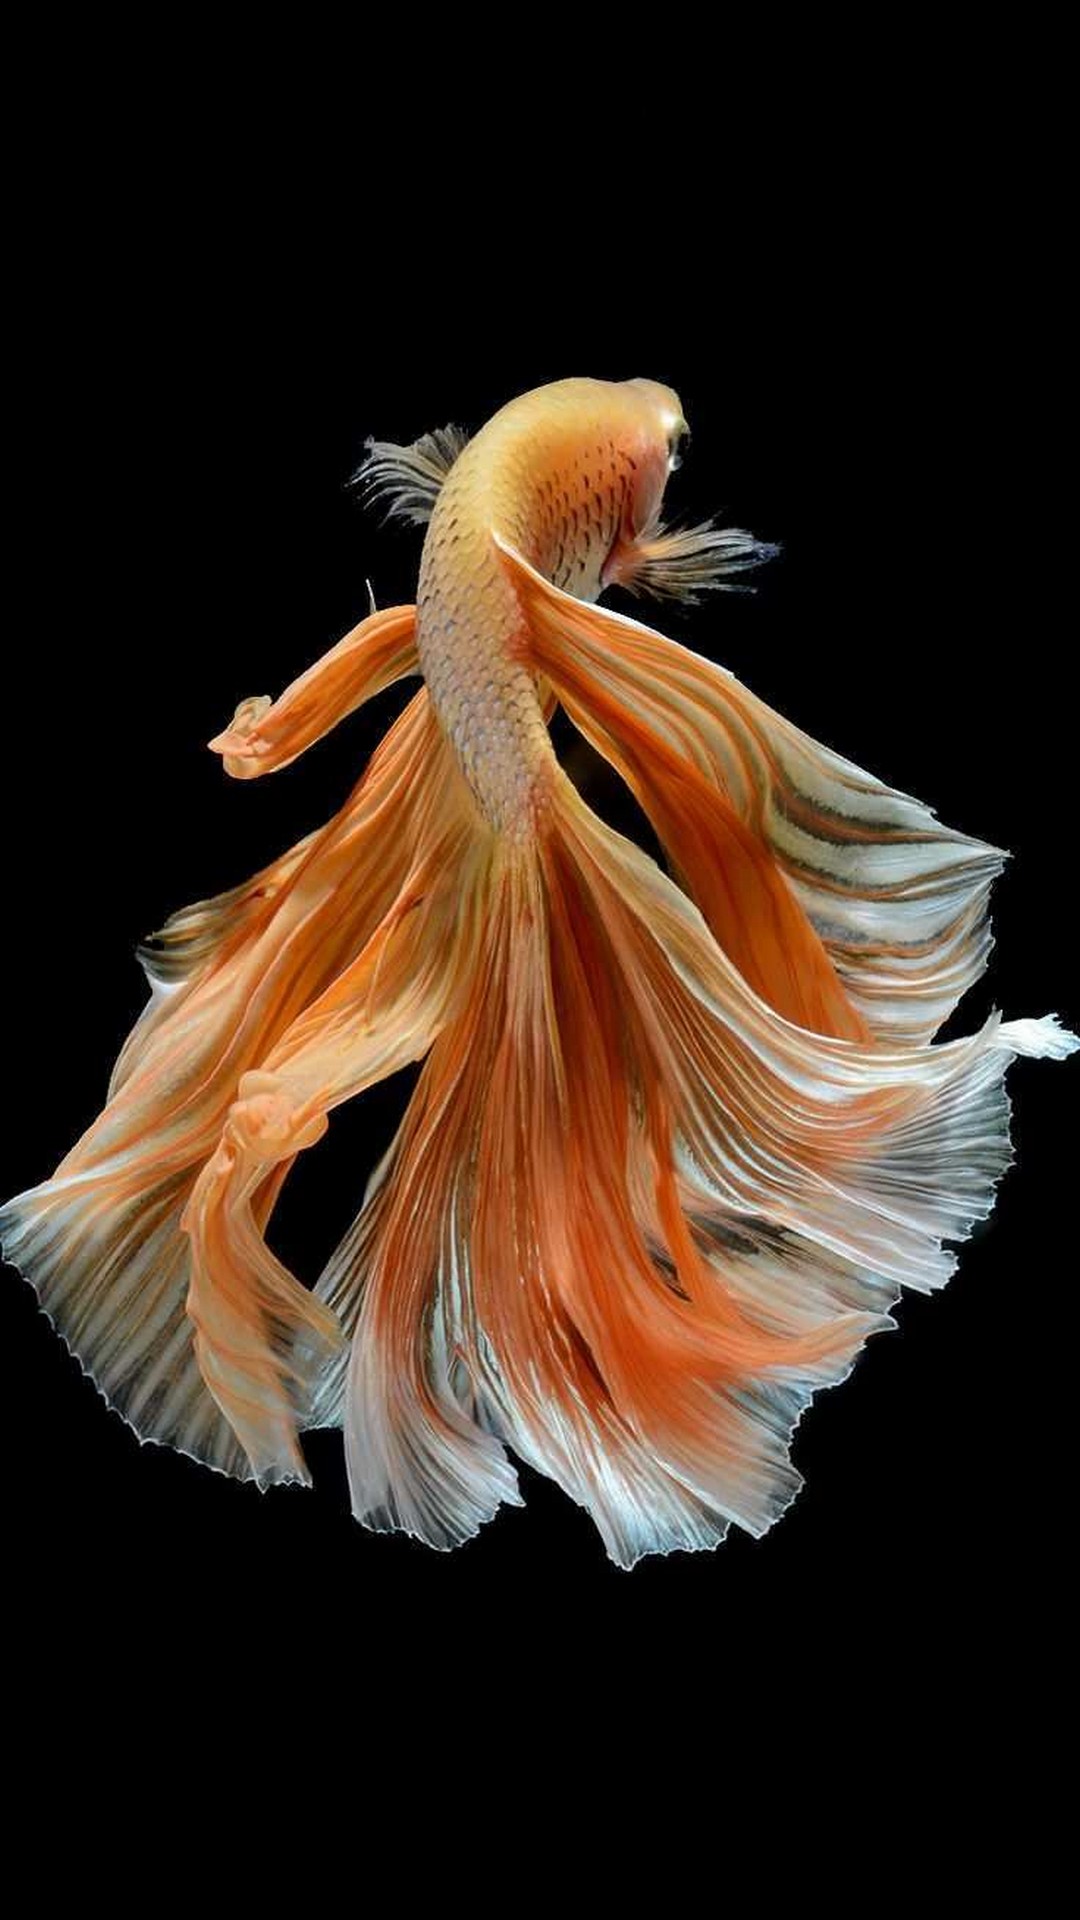 Iphone 6s Wallpaper Home Screen With High-resolution - Most Beautiful Siamese Fighting Fish - HD Wallpaper 